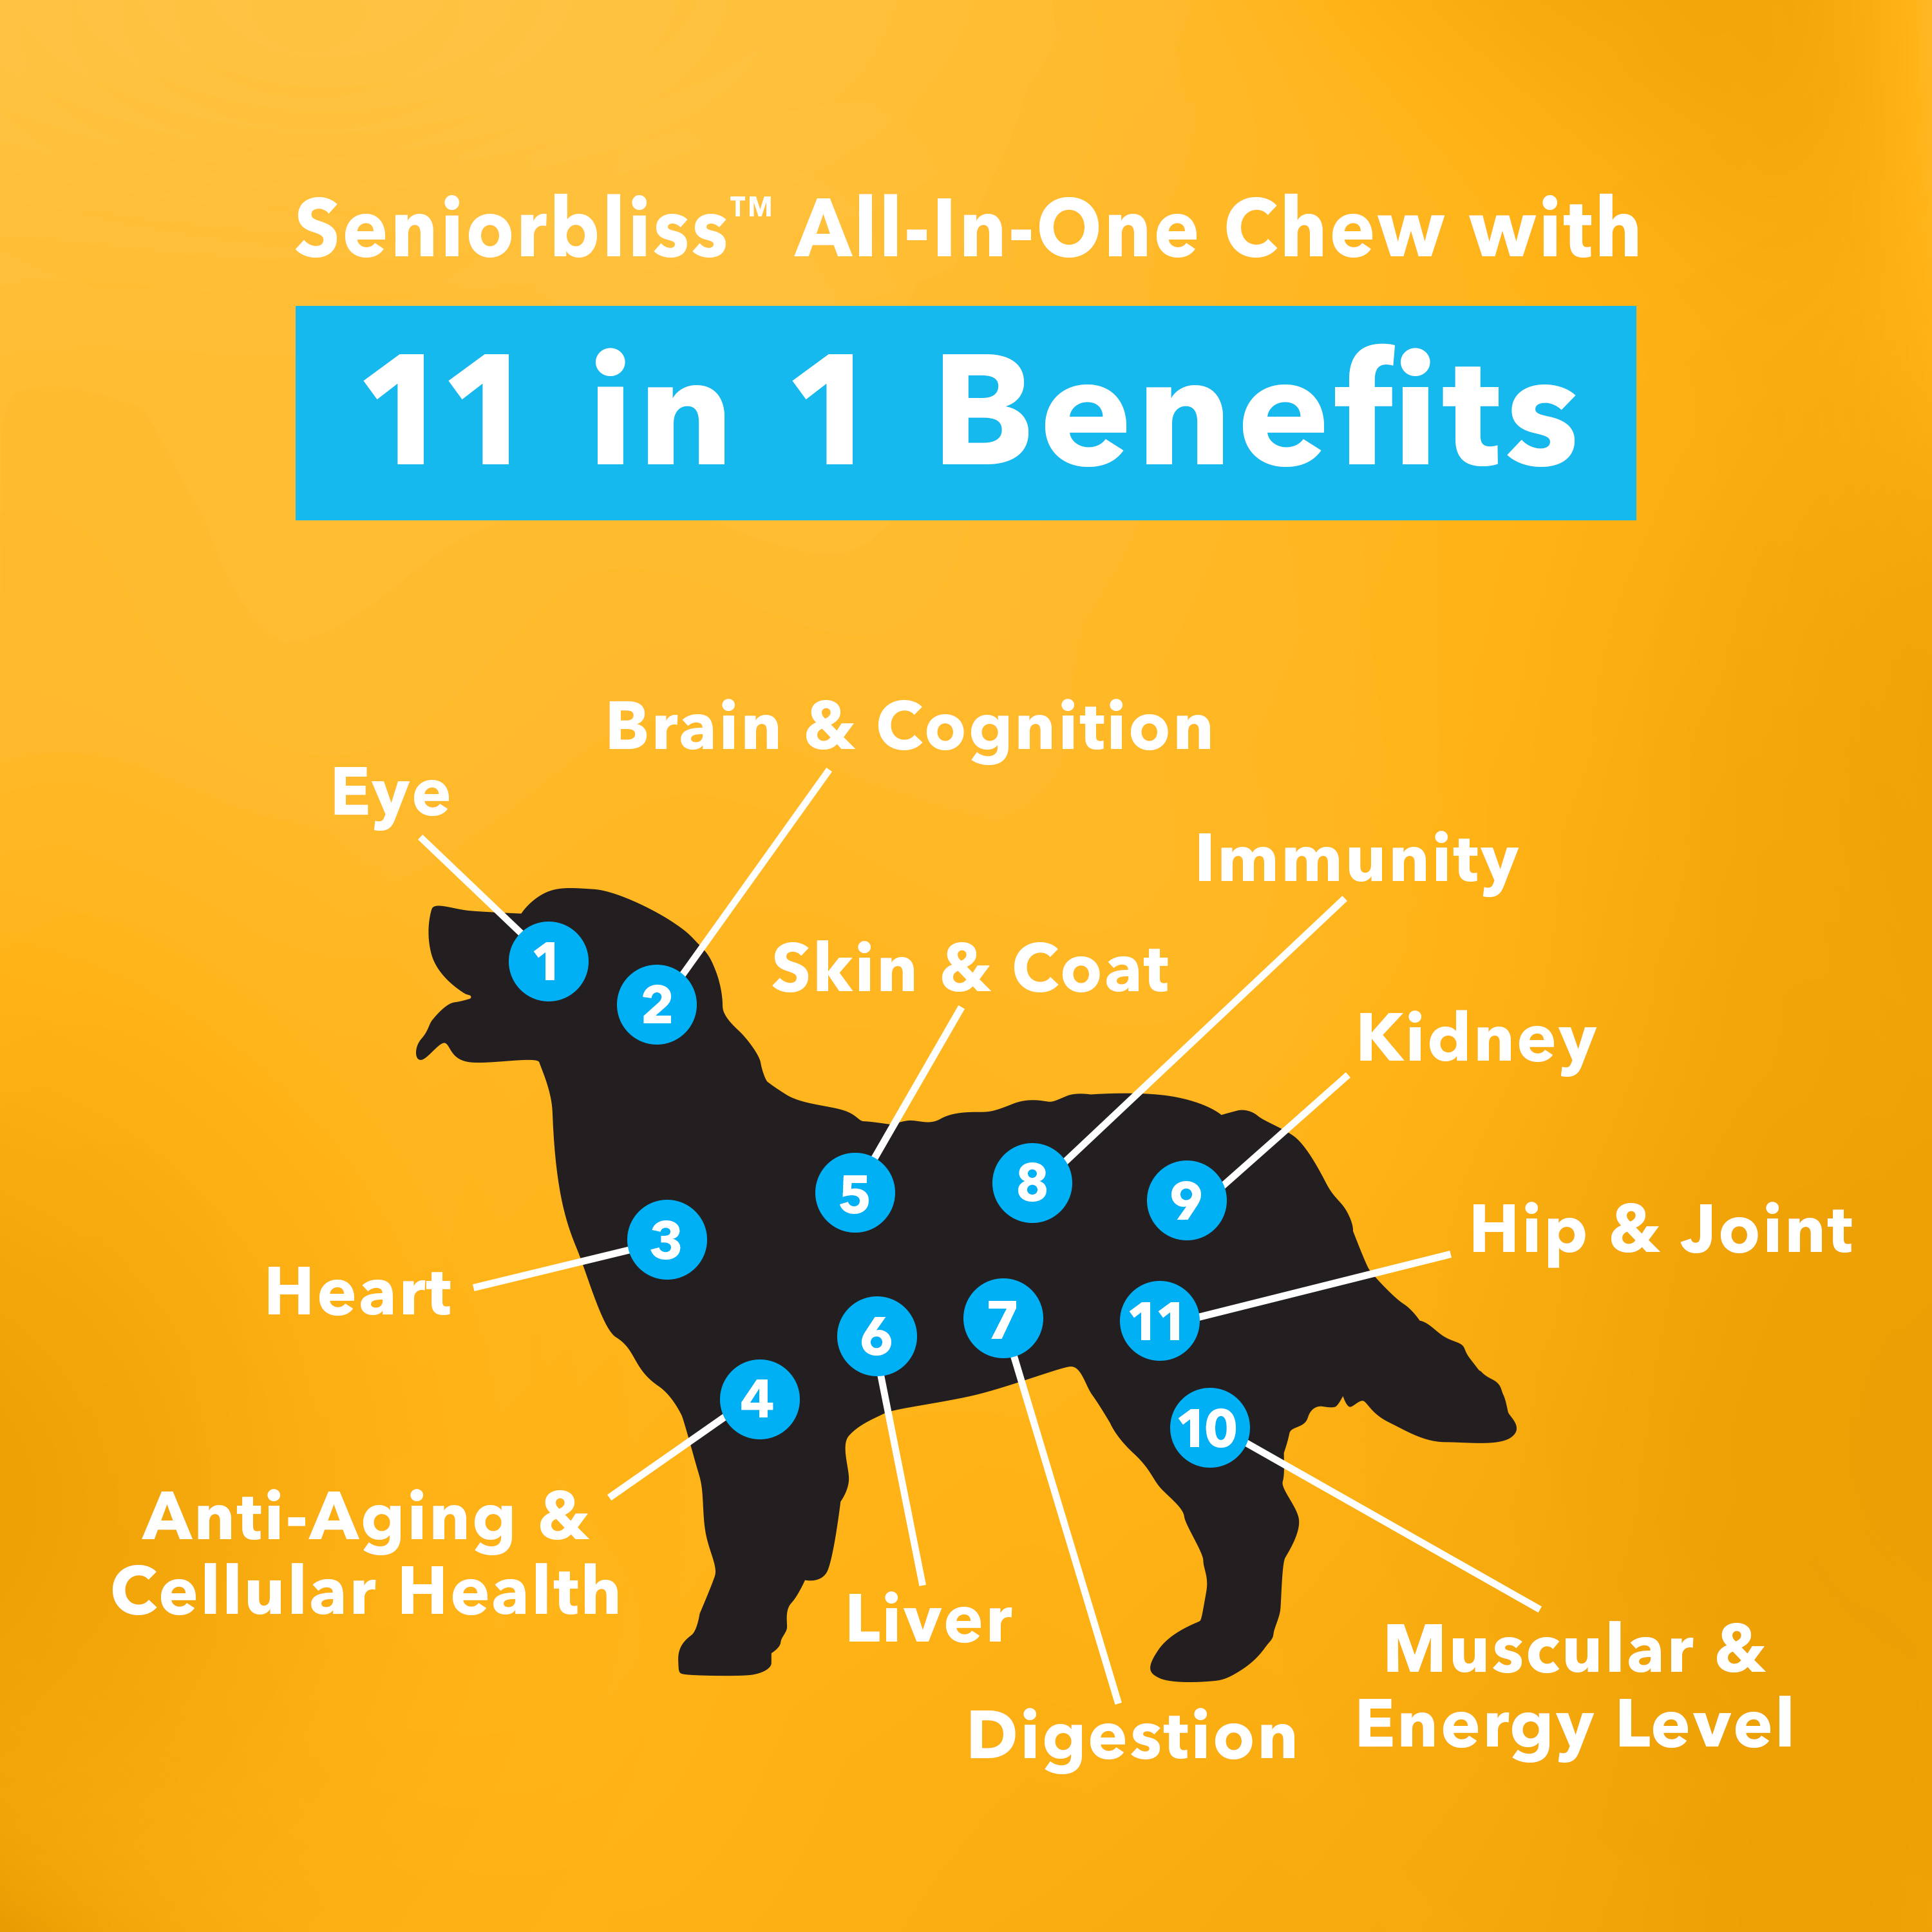 Seniorbliss All-in-one chew with 11 benefits image with dog silhouette pointing to 9 key functions that supports aging: Eye, Brain & Cognition, Immunity, Hip & Joint, Digestion, Heart, Energy & Muscular, and Anti-Aging & Cellular Health 